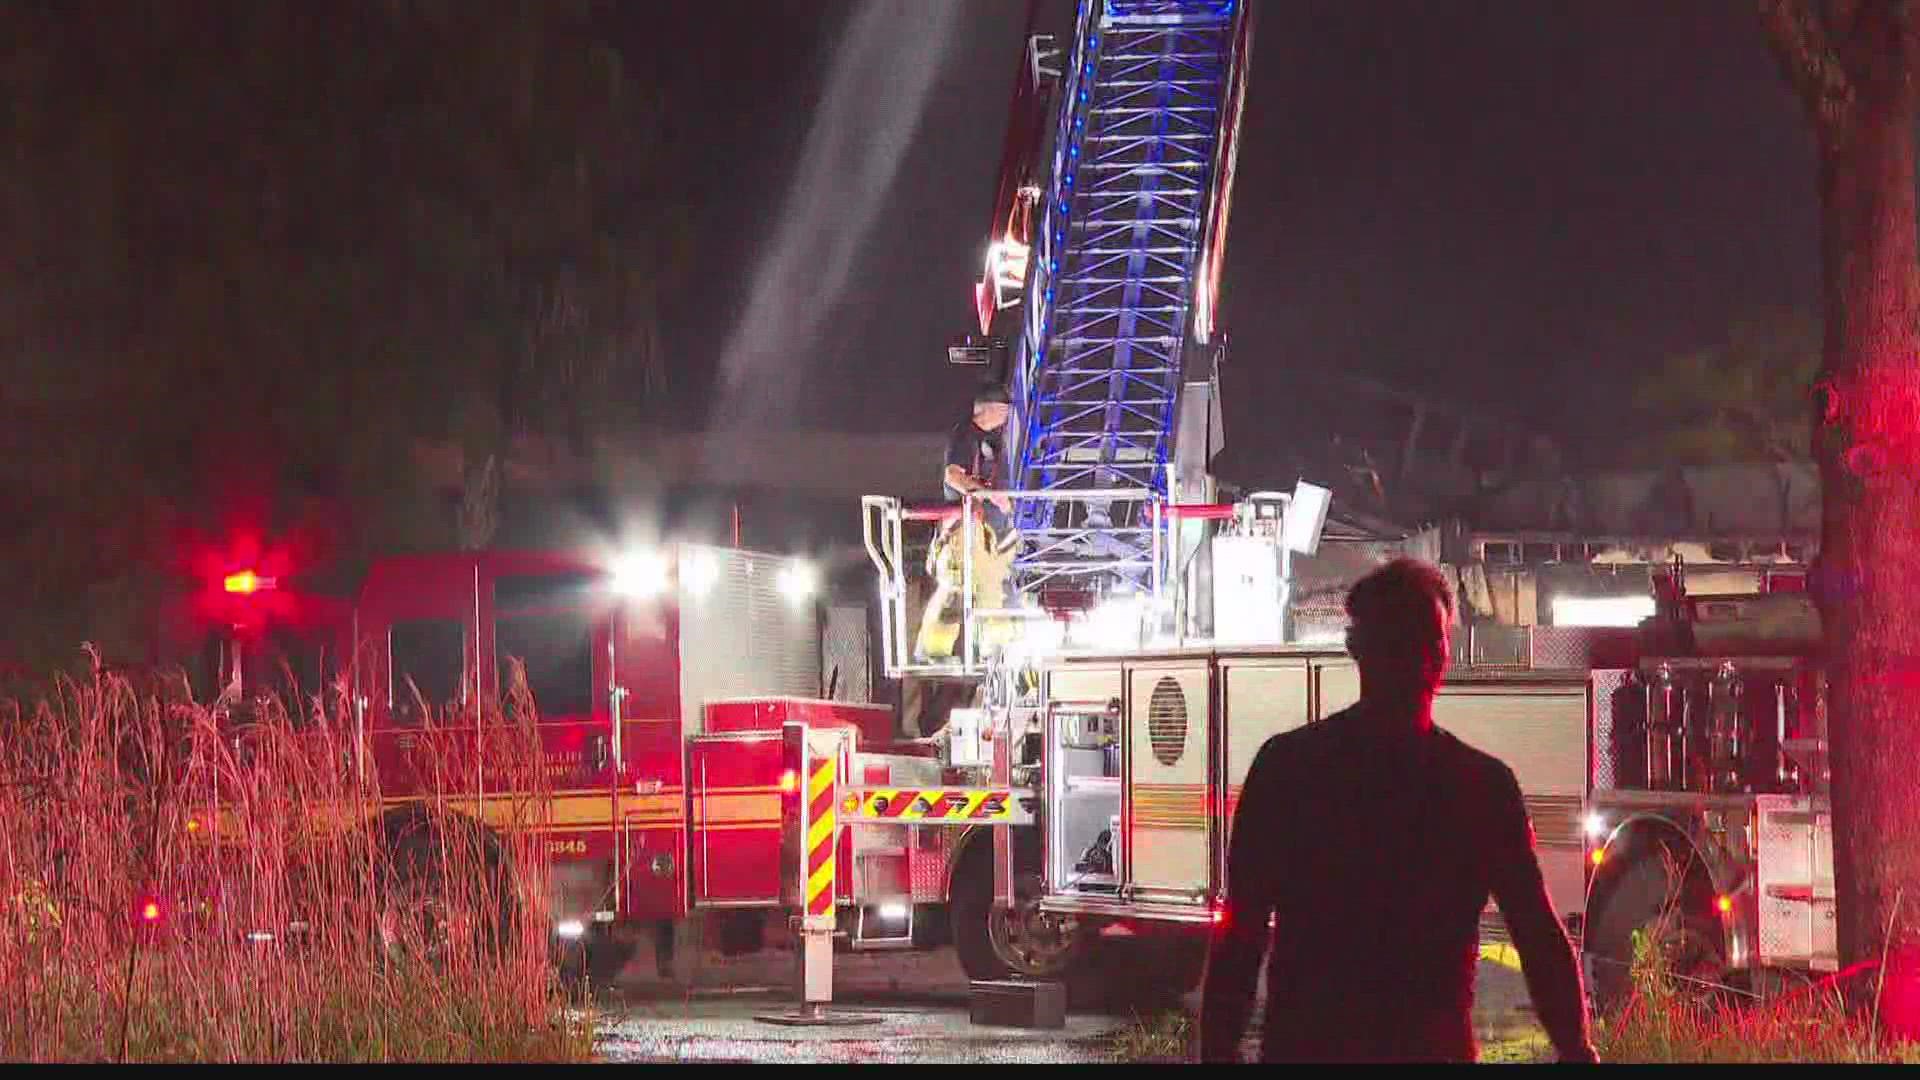 Crews responded to flames at Ellis Road and Mizzell Drive around 8:35 p.m. at an old radio station, according to officials.